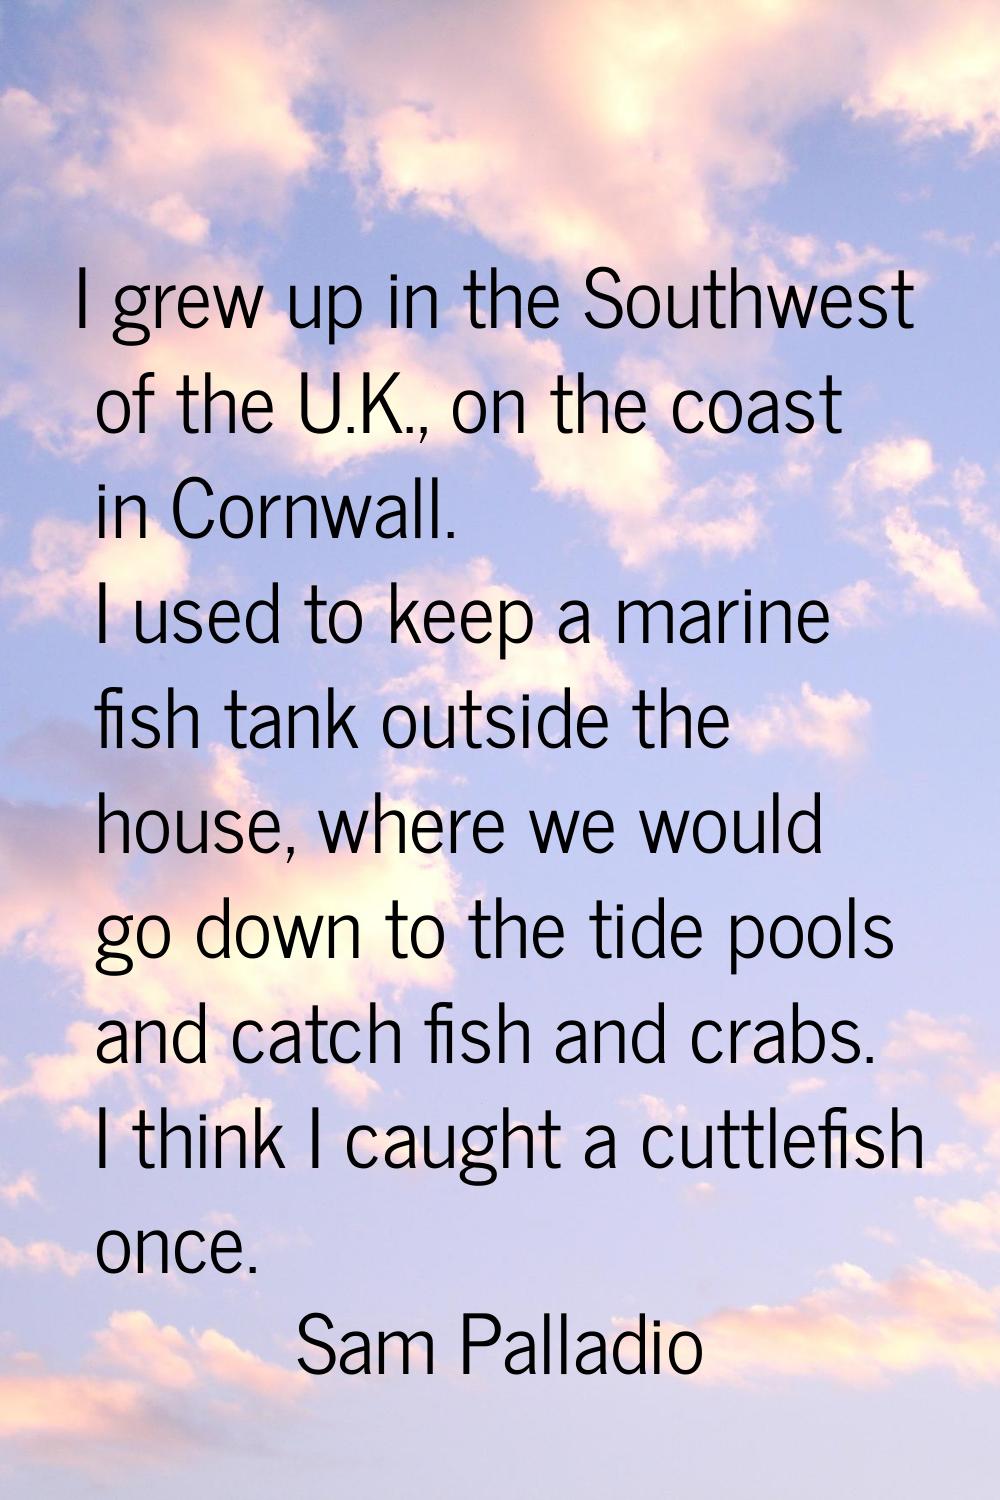 I grew up in the Southwest of the U.K., on the coast in Cornwall. I used to keep a marine fish tank